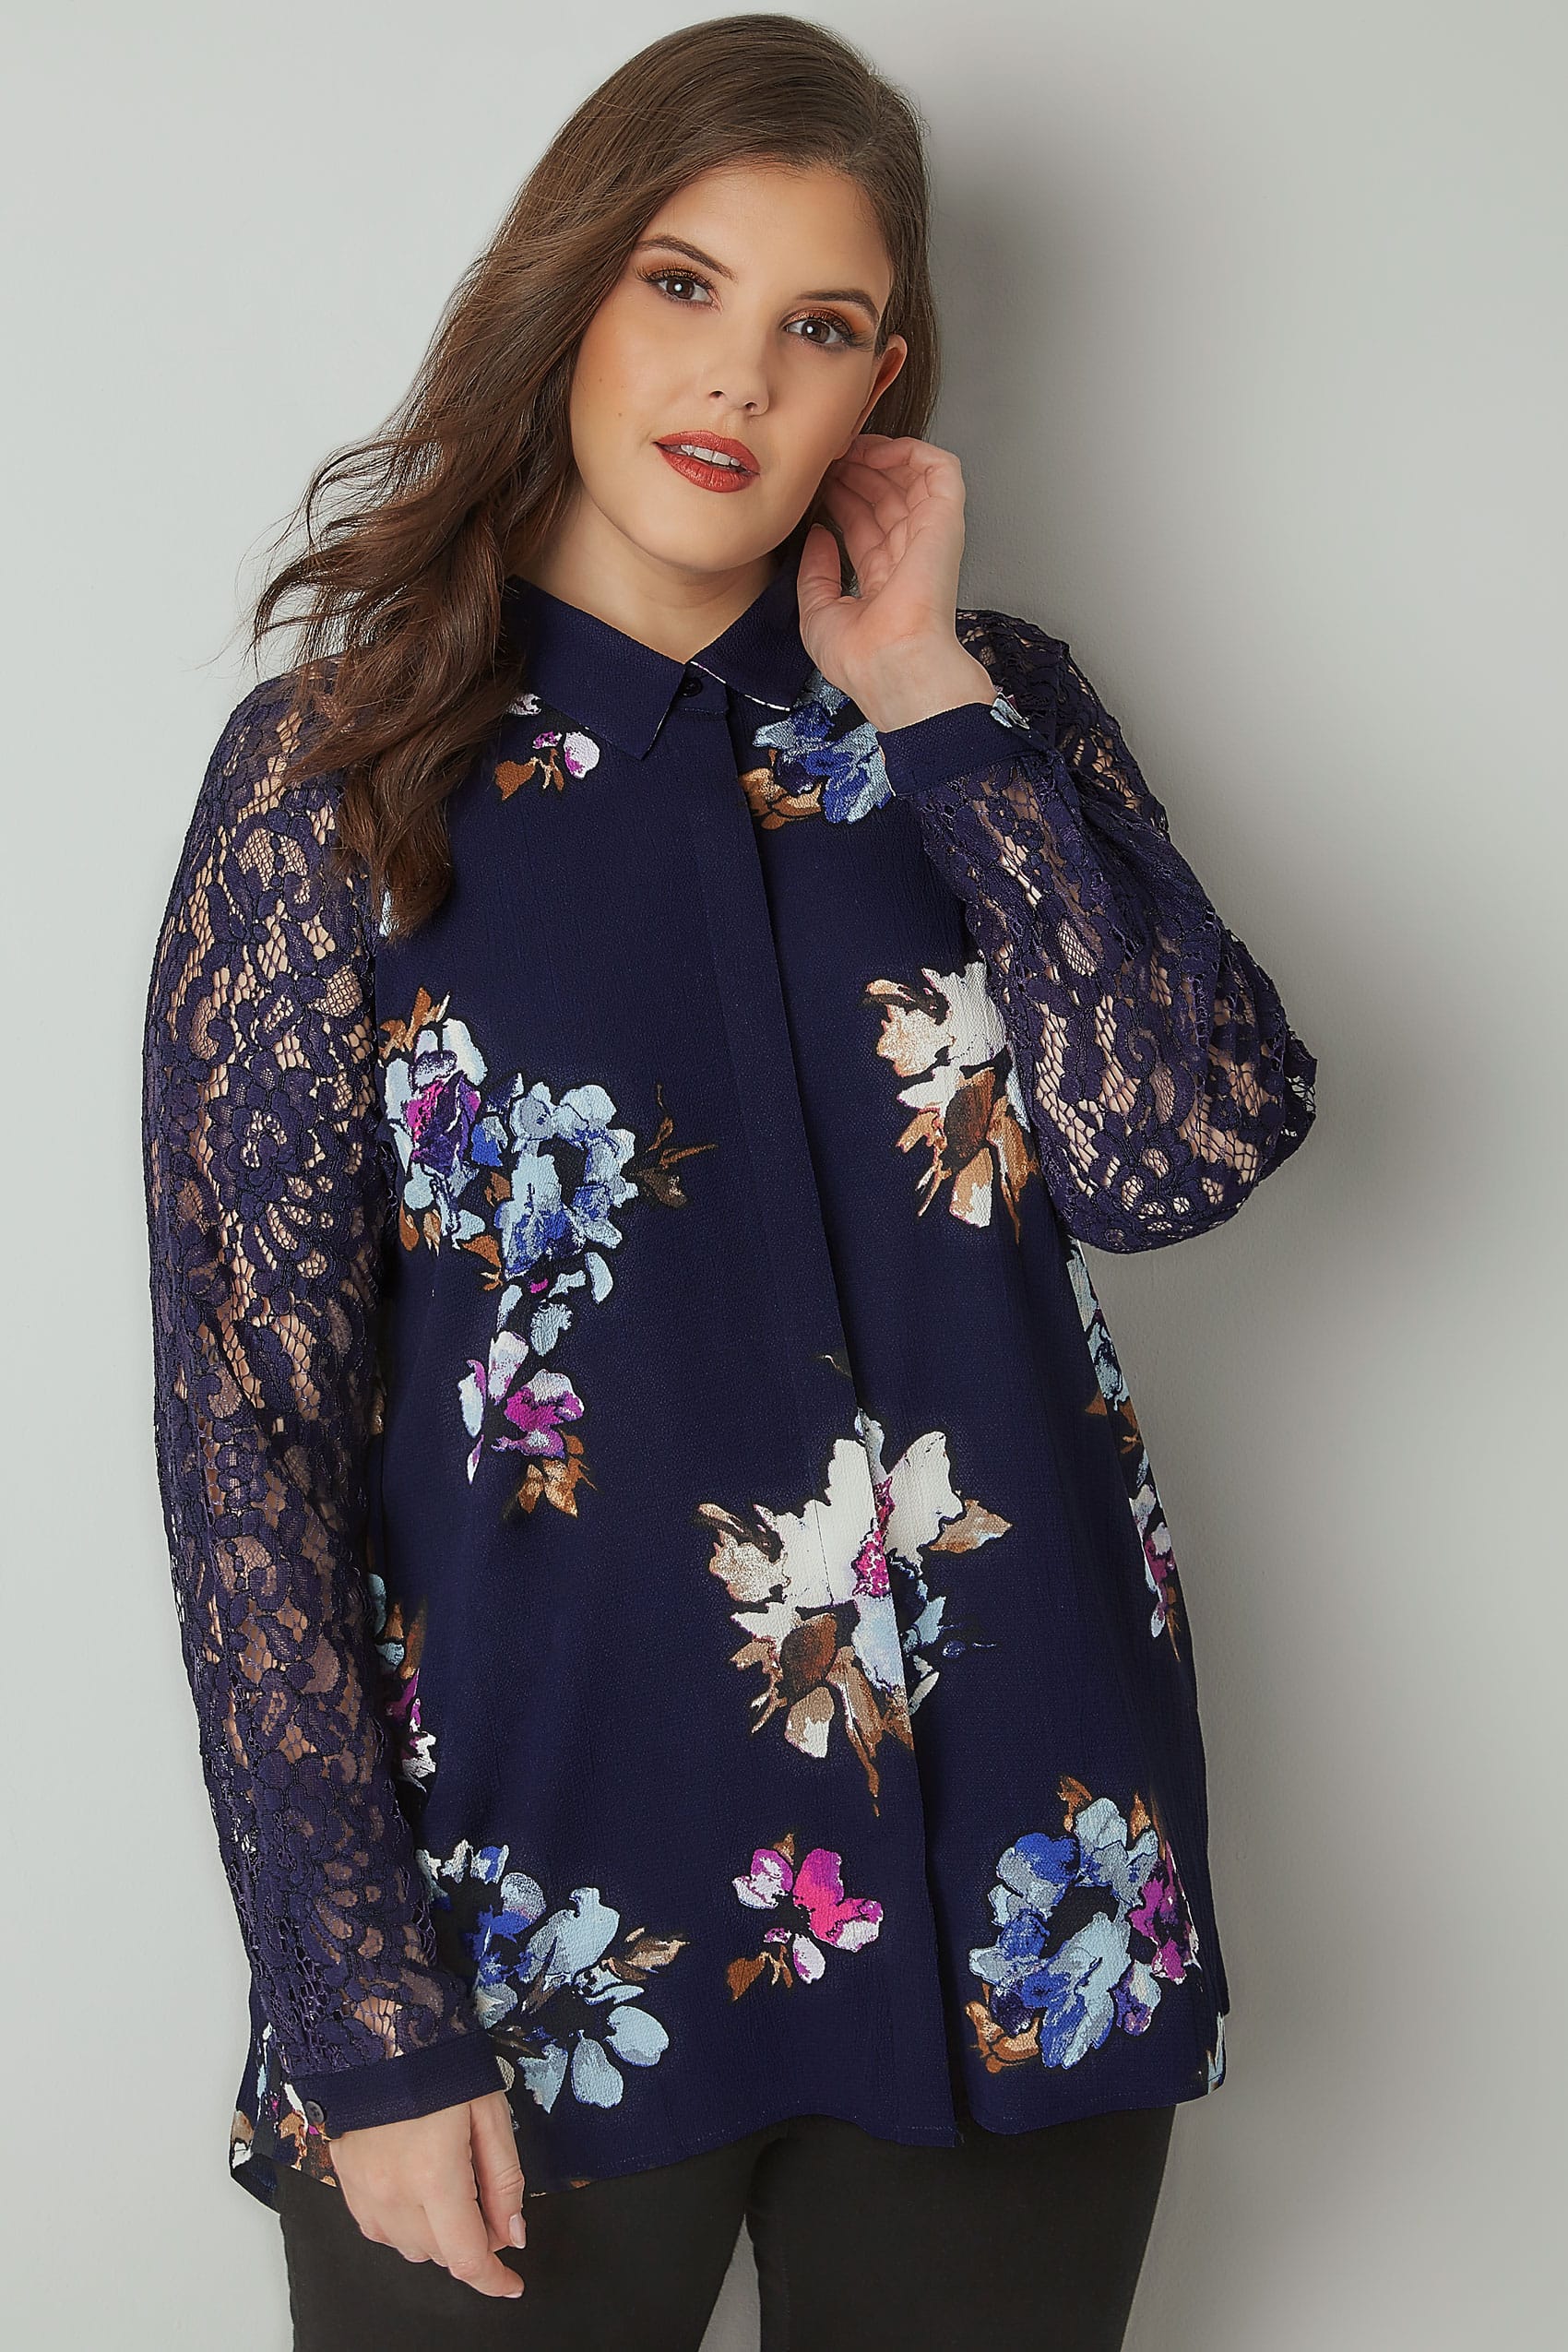 YOURS LONDON Navy Floral Print Shirt With Lace Sleeves, plus size 16 to 32